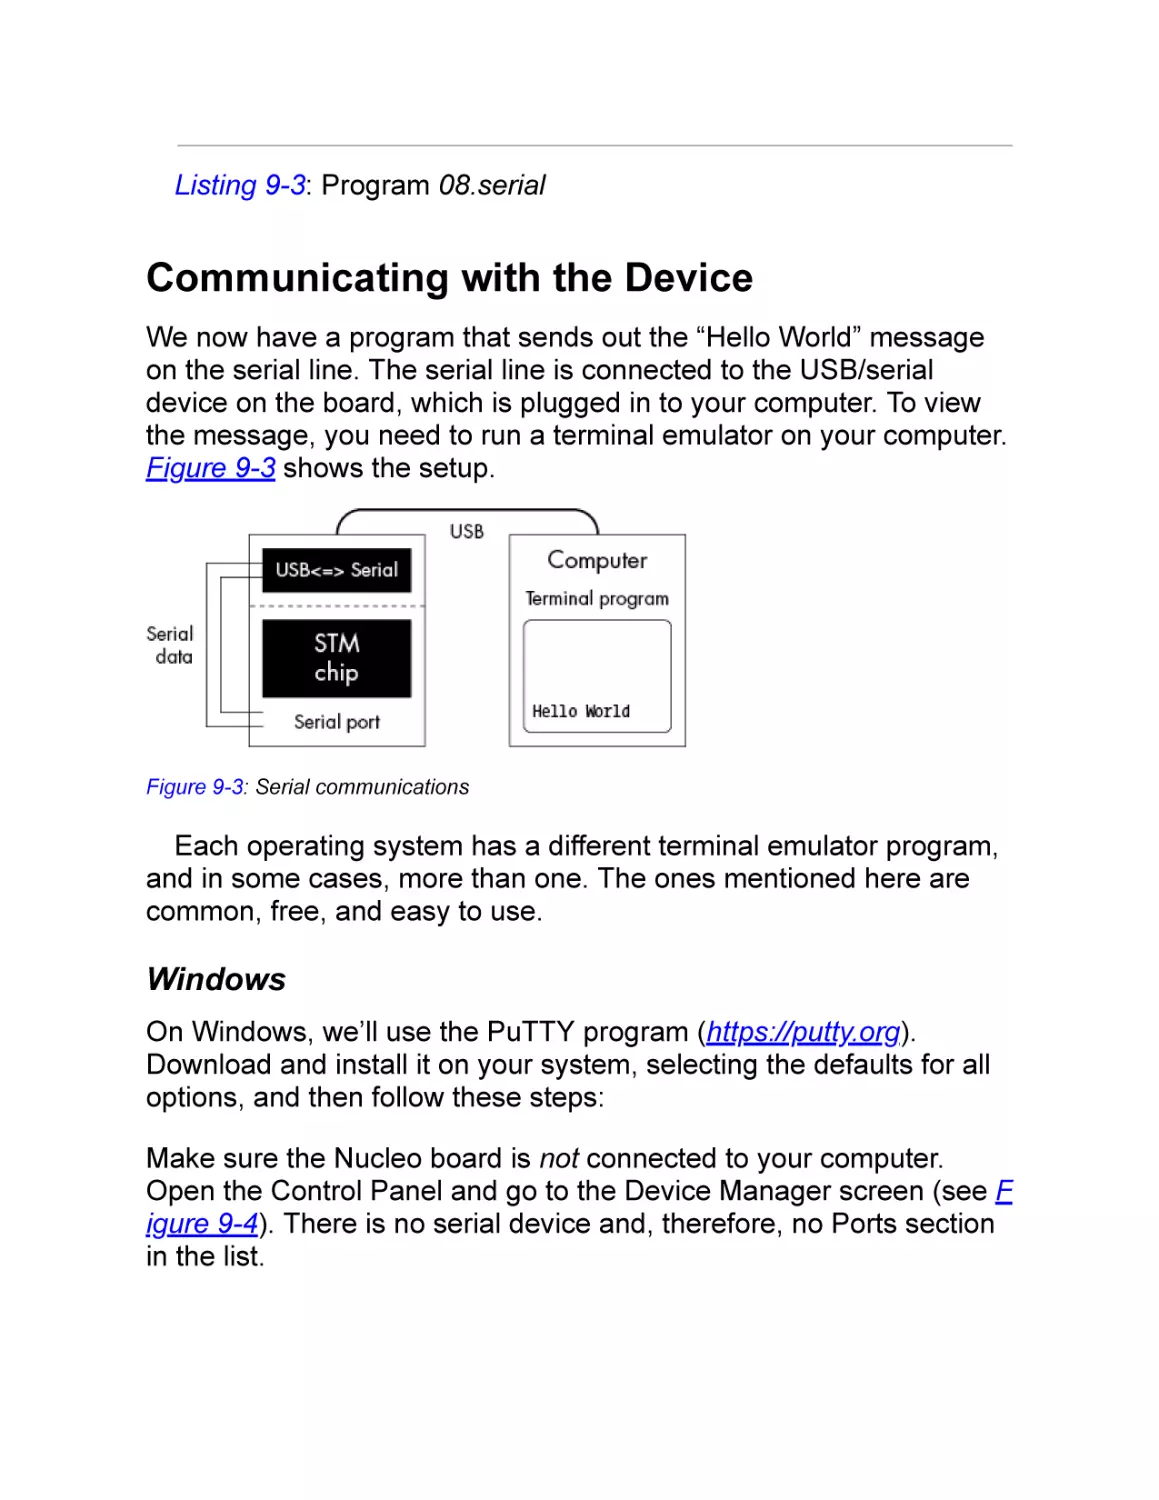 Communicating with the Device
Windows